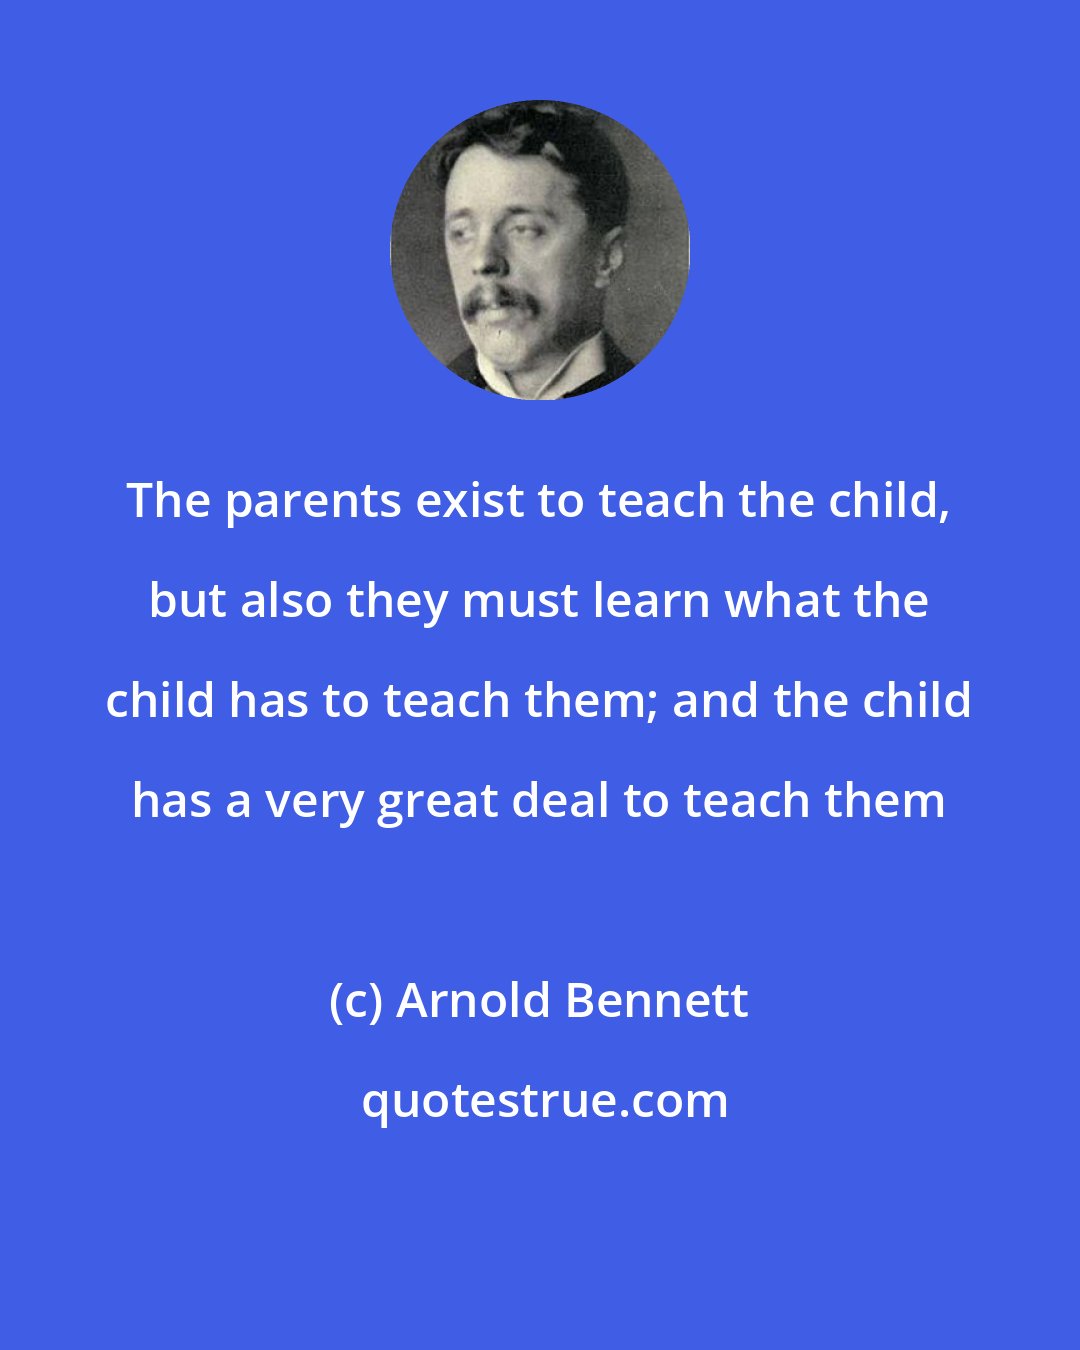 Arnold Bennett: The parents exist to teach the child, but also they must learn what the child has to teach them; and the child has a very great deal to teach them